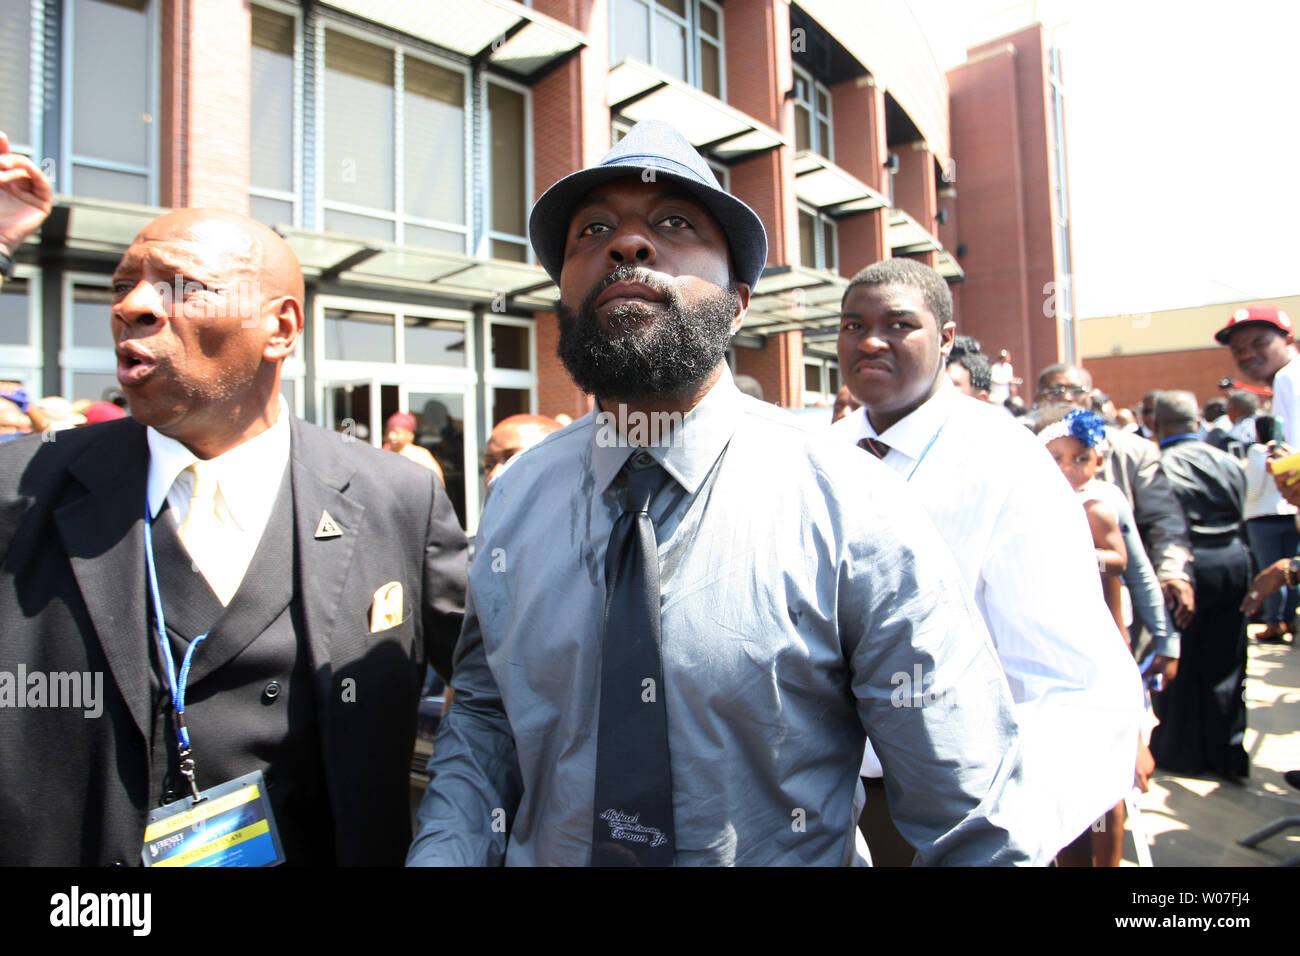 Michael Brown Sr. leaves the Friendly Temple Missionary Baptist Church at the completion of the funeral for his son Michael Brown Jr.  in St. Louis on August 25, 2014. Brown gained attention after was shot by a white Ferguson, Missouri police officer on August 9 and was unarmed. The shooting led to several nights of looting, arrests and heavy police presence.   UPI/Bill Greenblatt Stock Photo